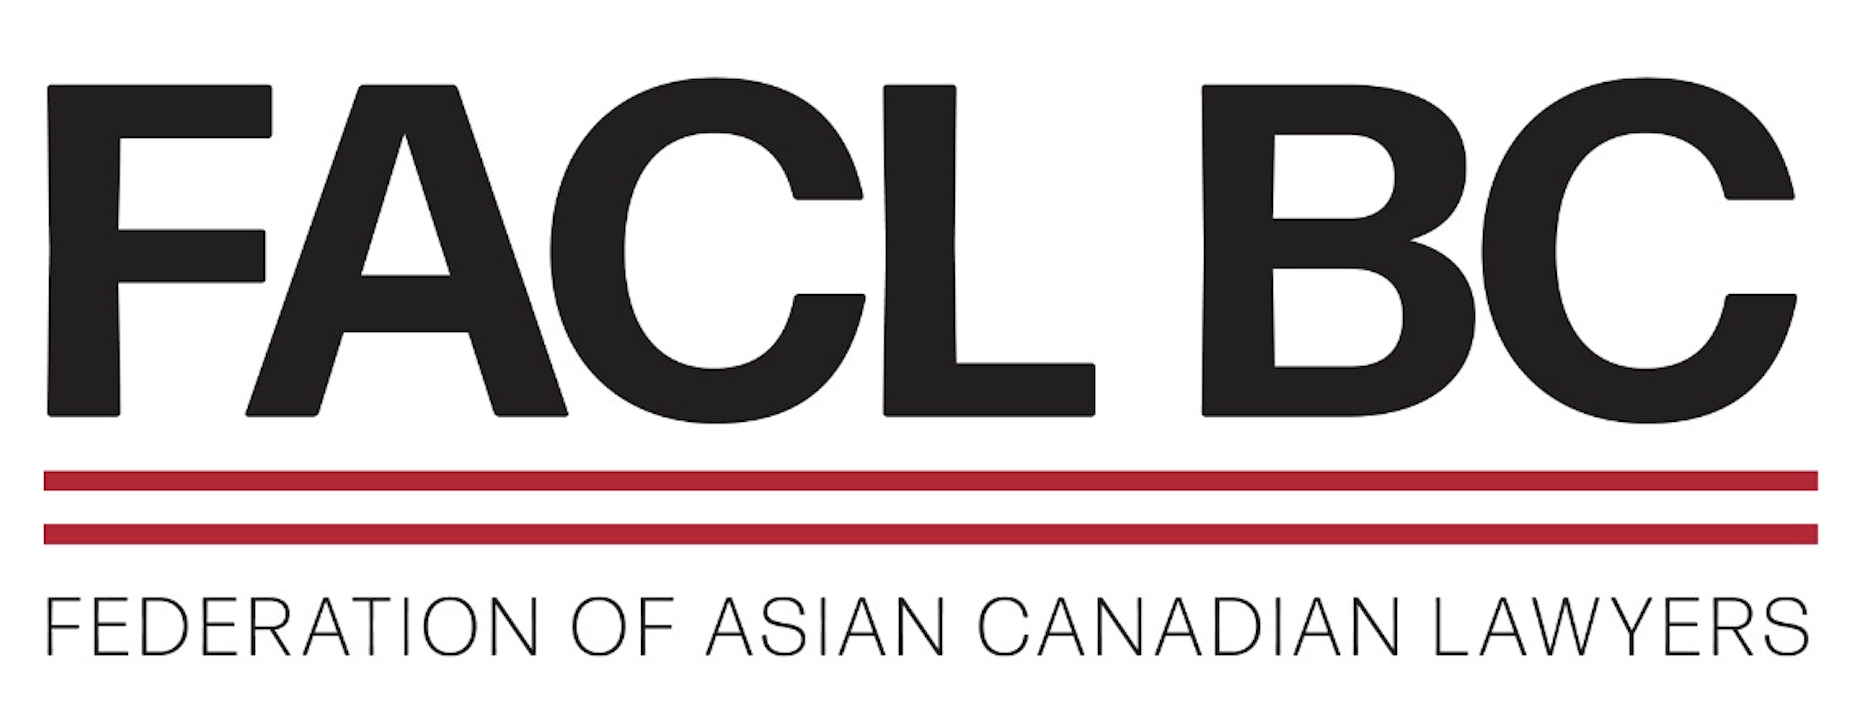 Federation of Asian Canadian Lawyers